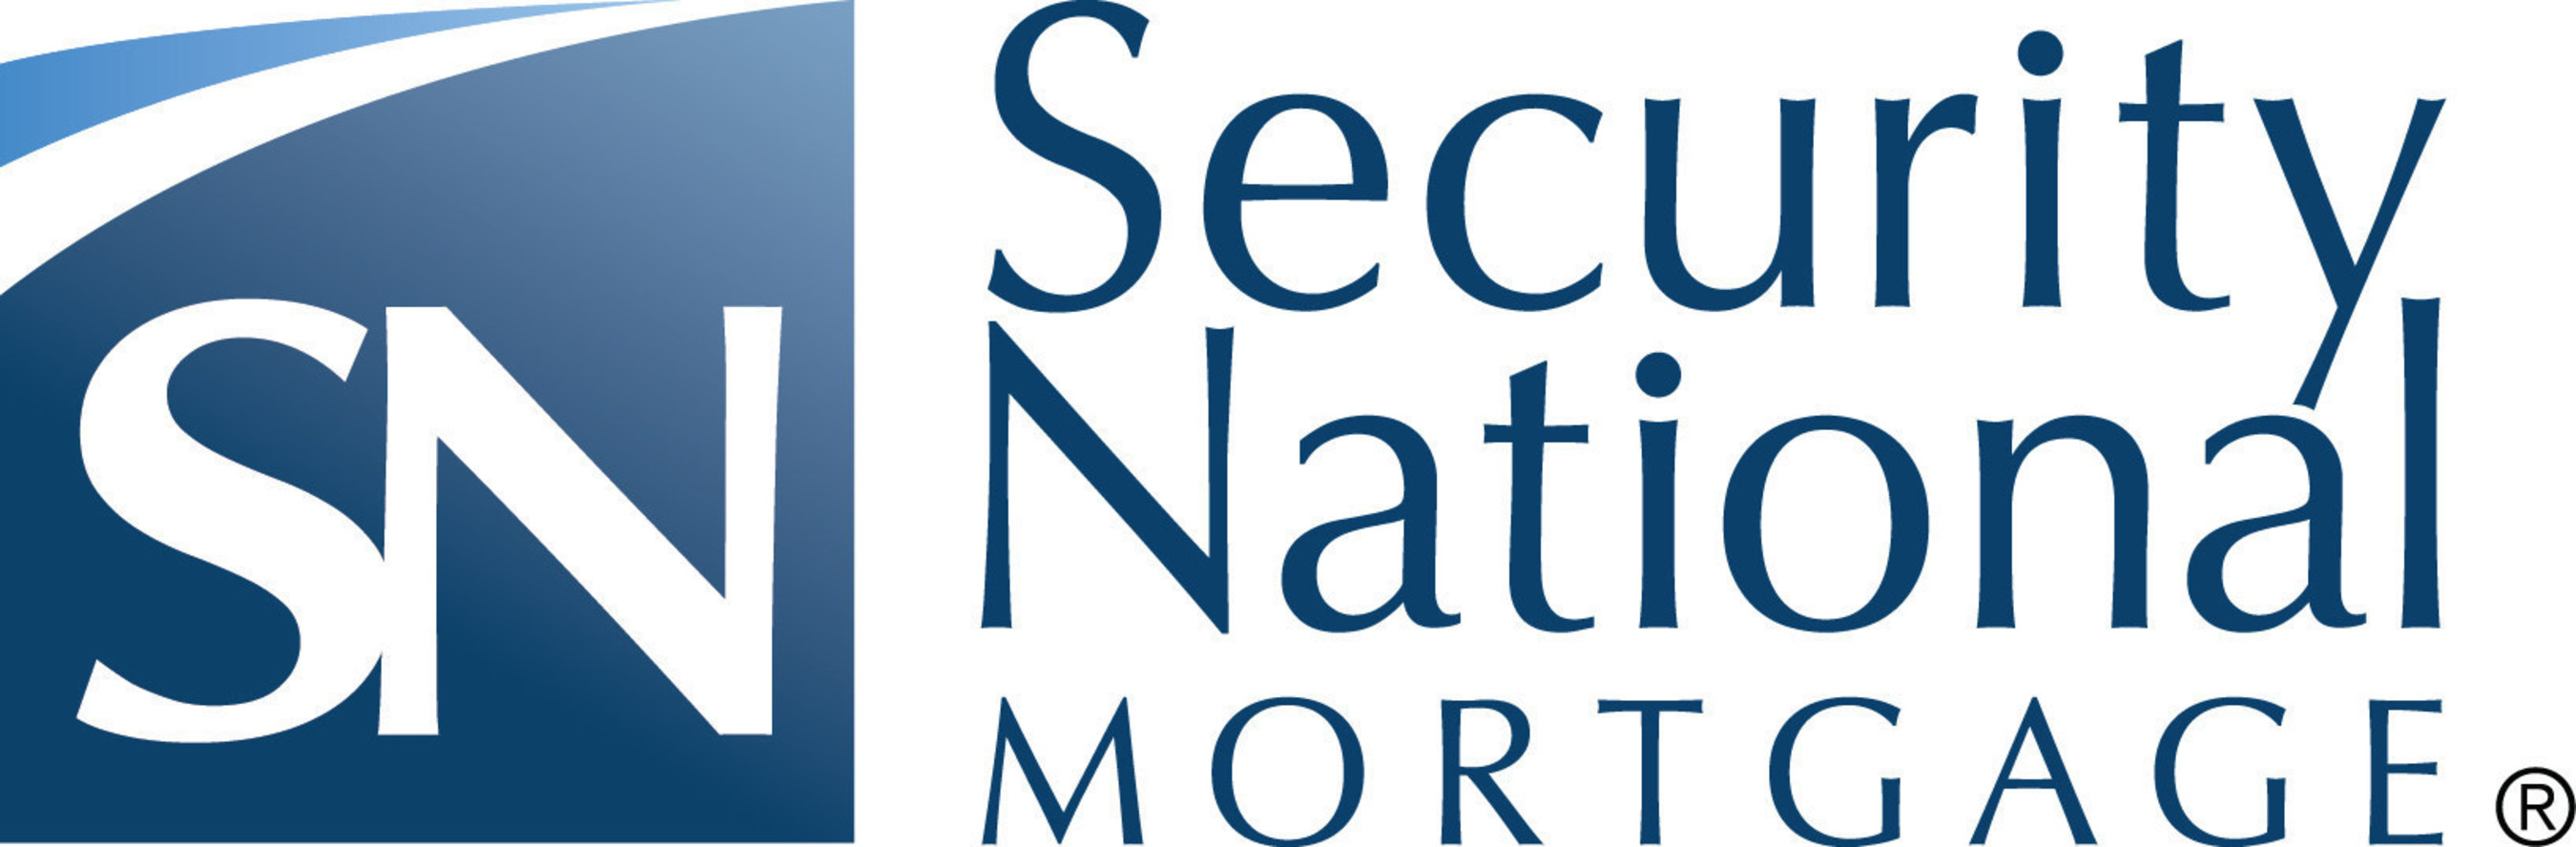 SecurityNational Mortgage Company specializes in affordable home financing solutions. NMLS #3116.